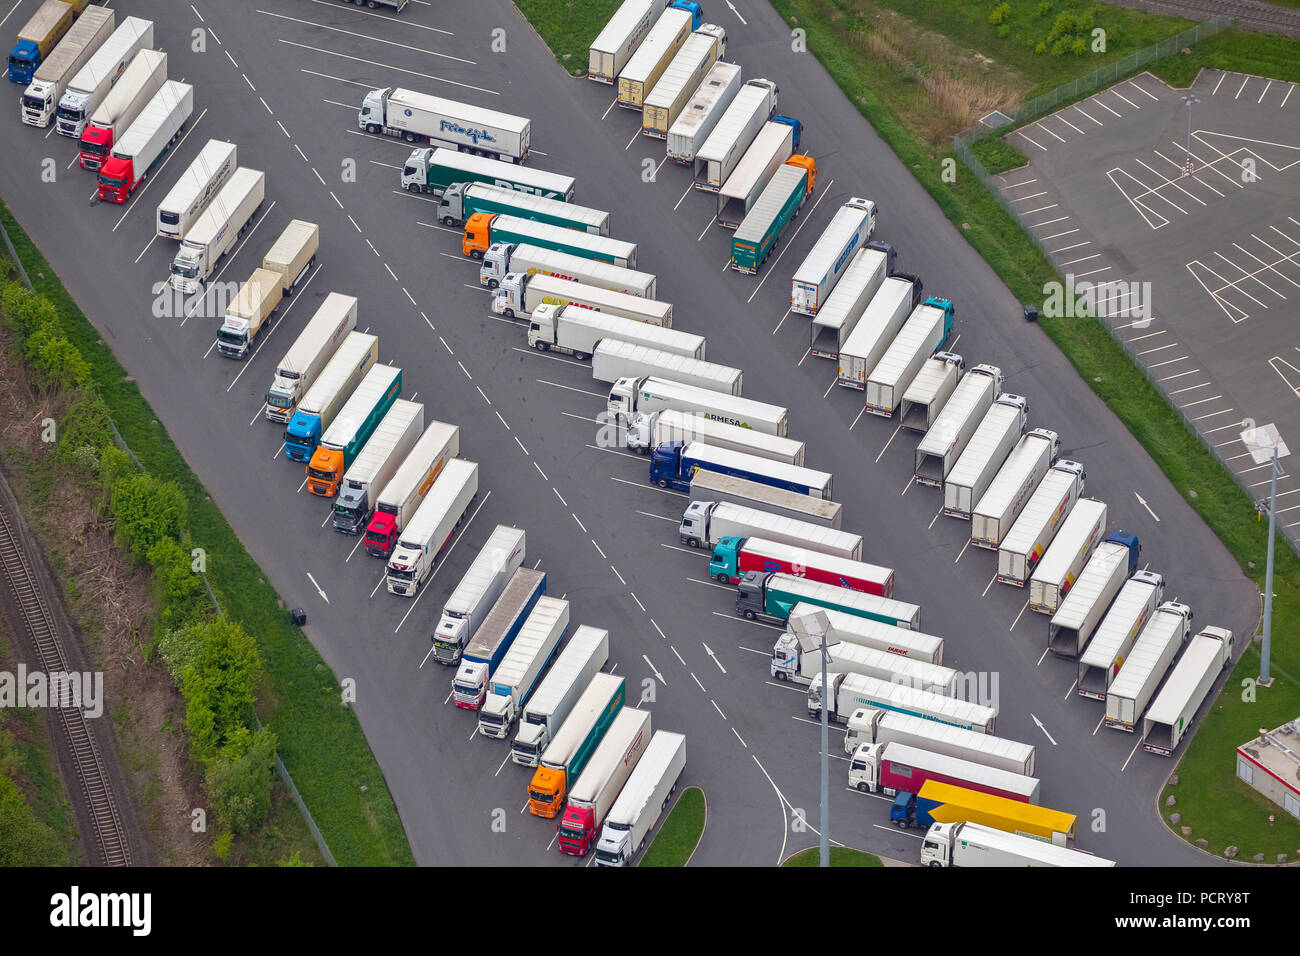 Truck terminal, Kaufland logistics centre, just-in-time delivery of goods, aerial view of Dortmund-Derne Stock Photo